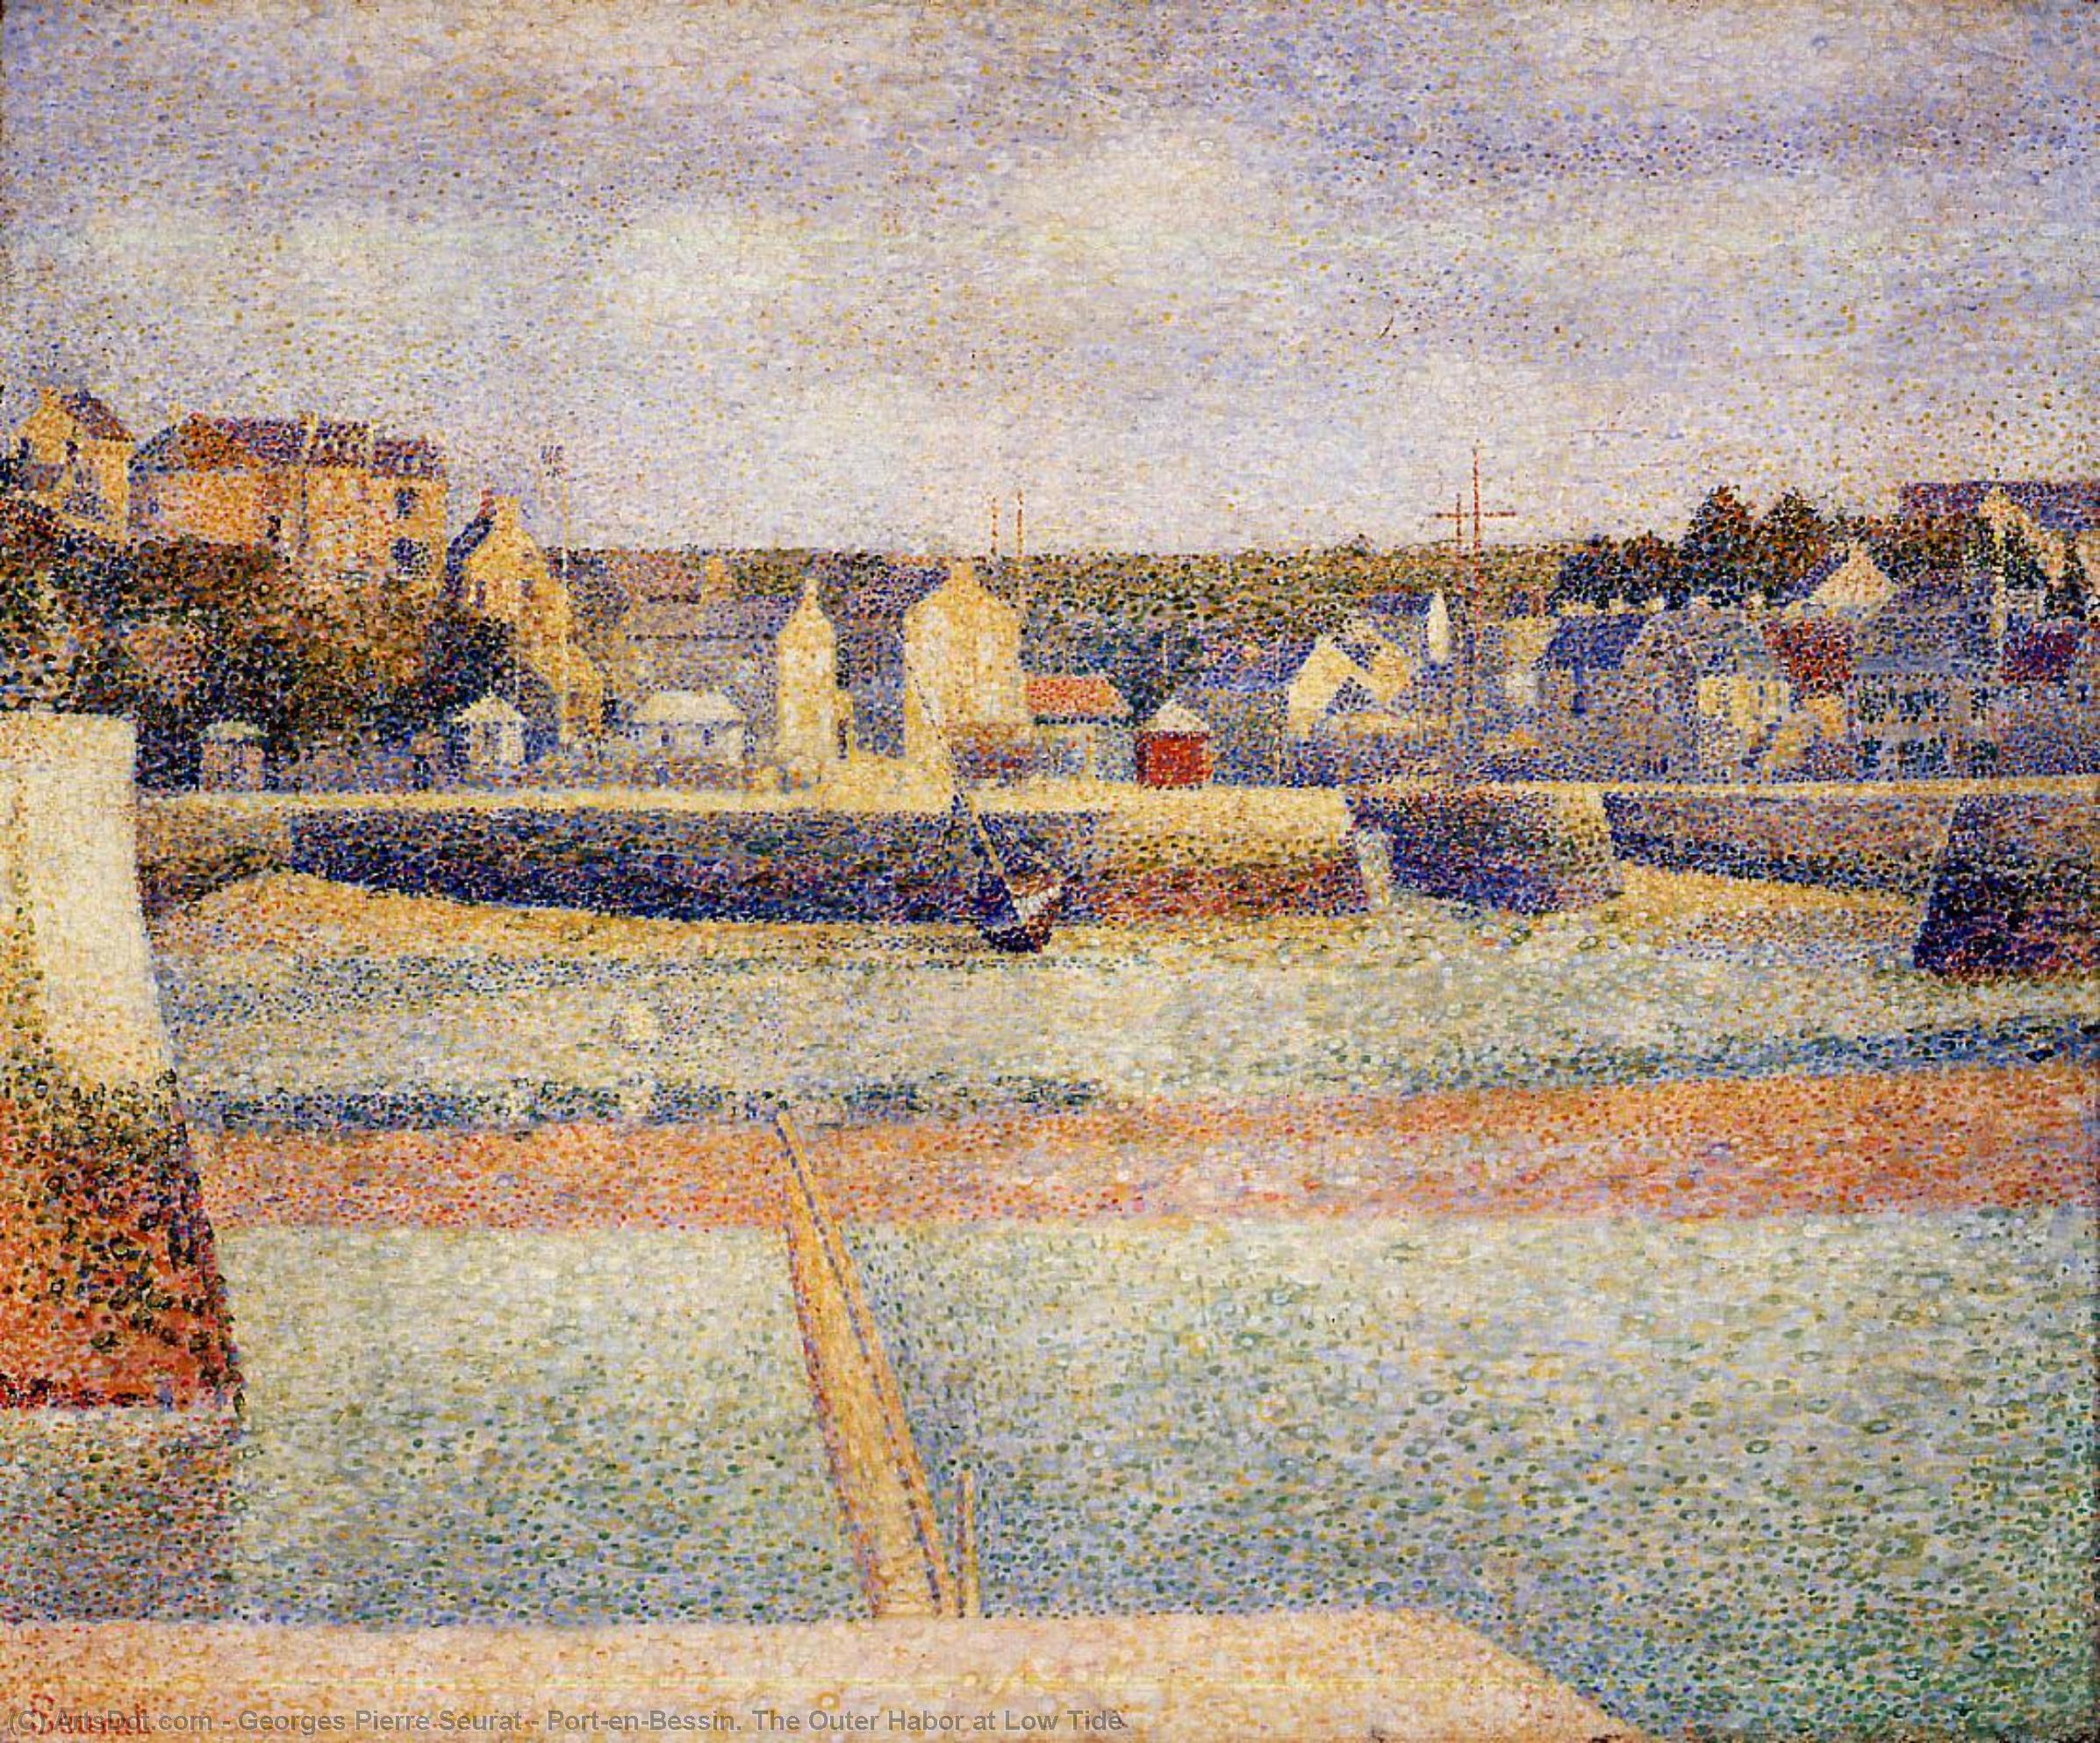 WikiOO.org - Encyclopedia of Fine Arts - Maleri, Artwork Georges Pierre Seurat - Port-en-Bessin. The Outer Habor at Low Tide